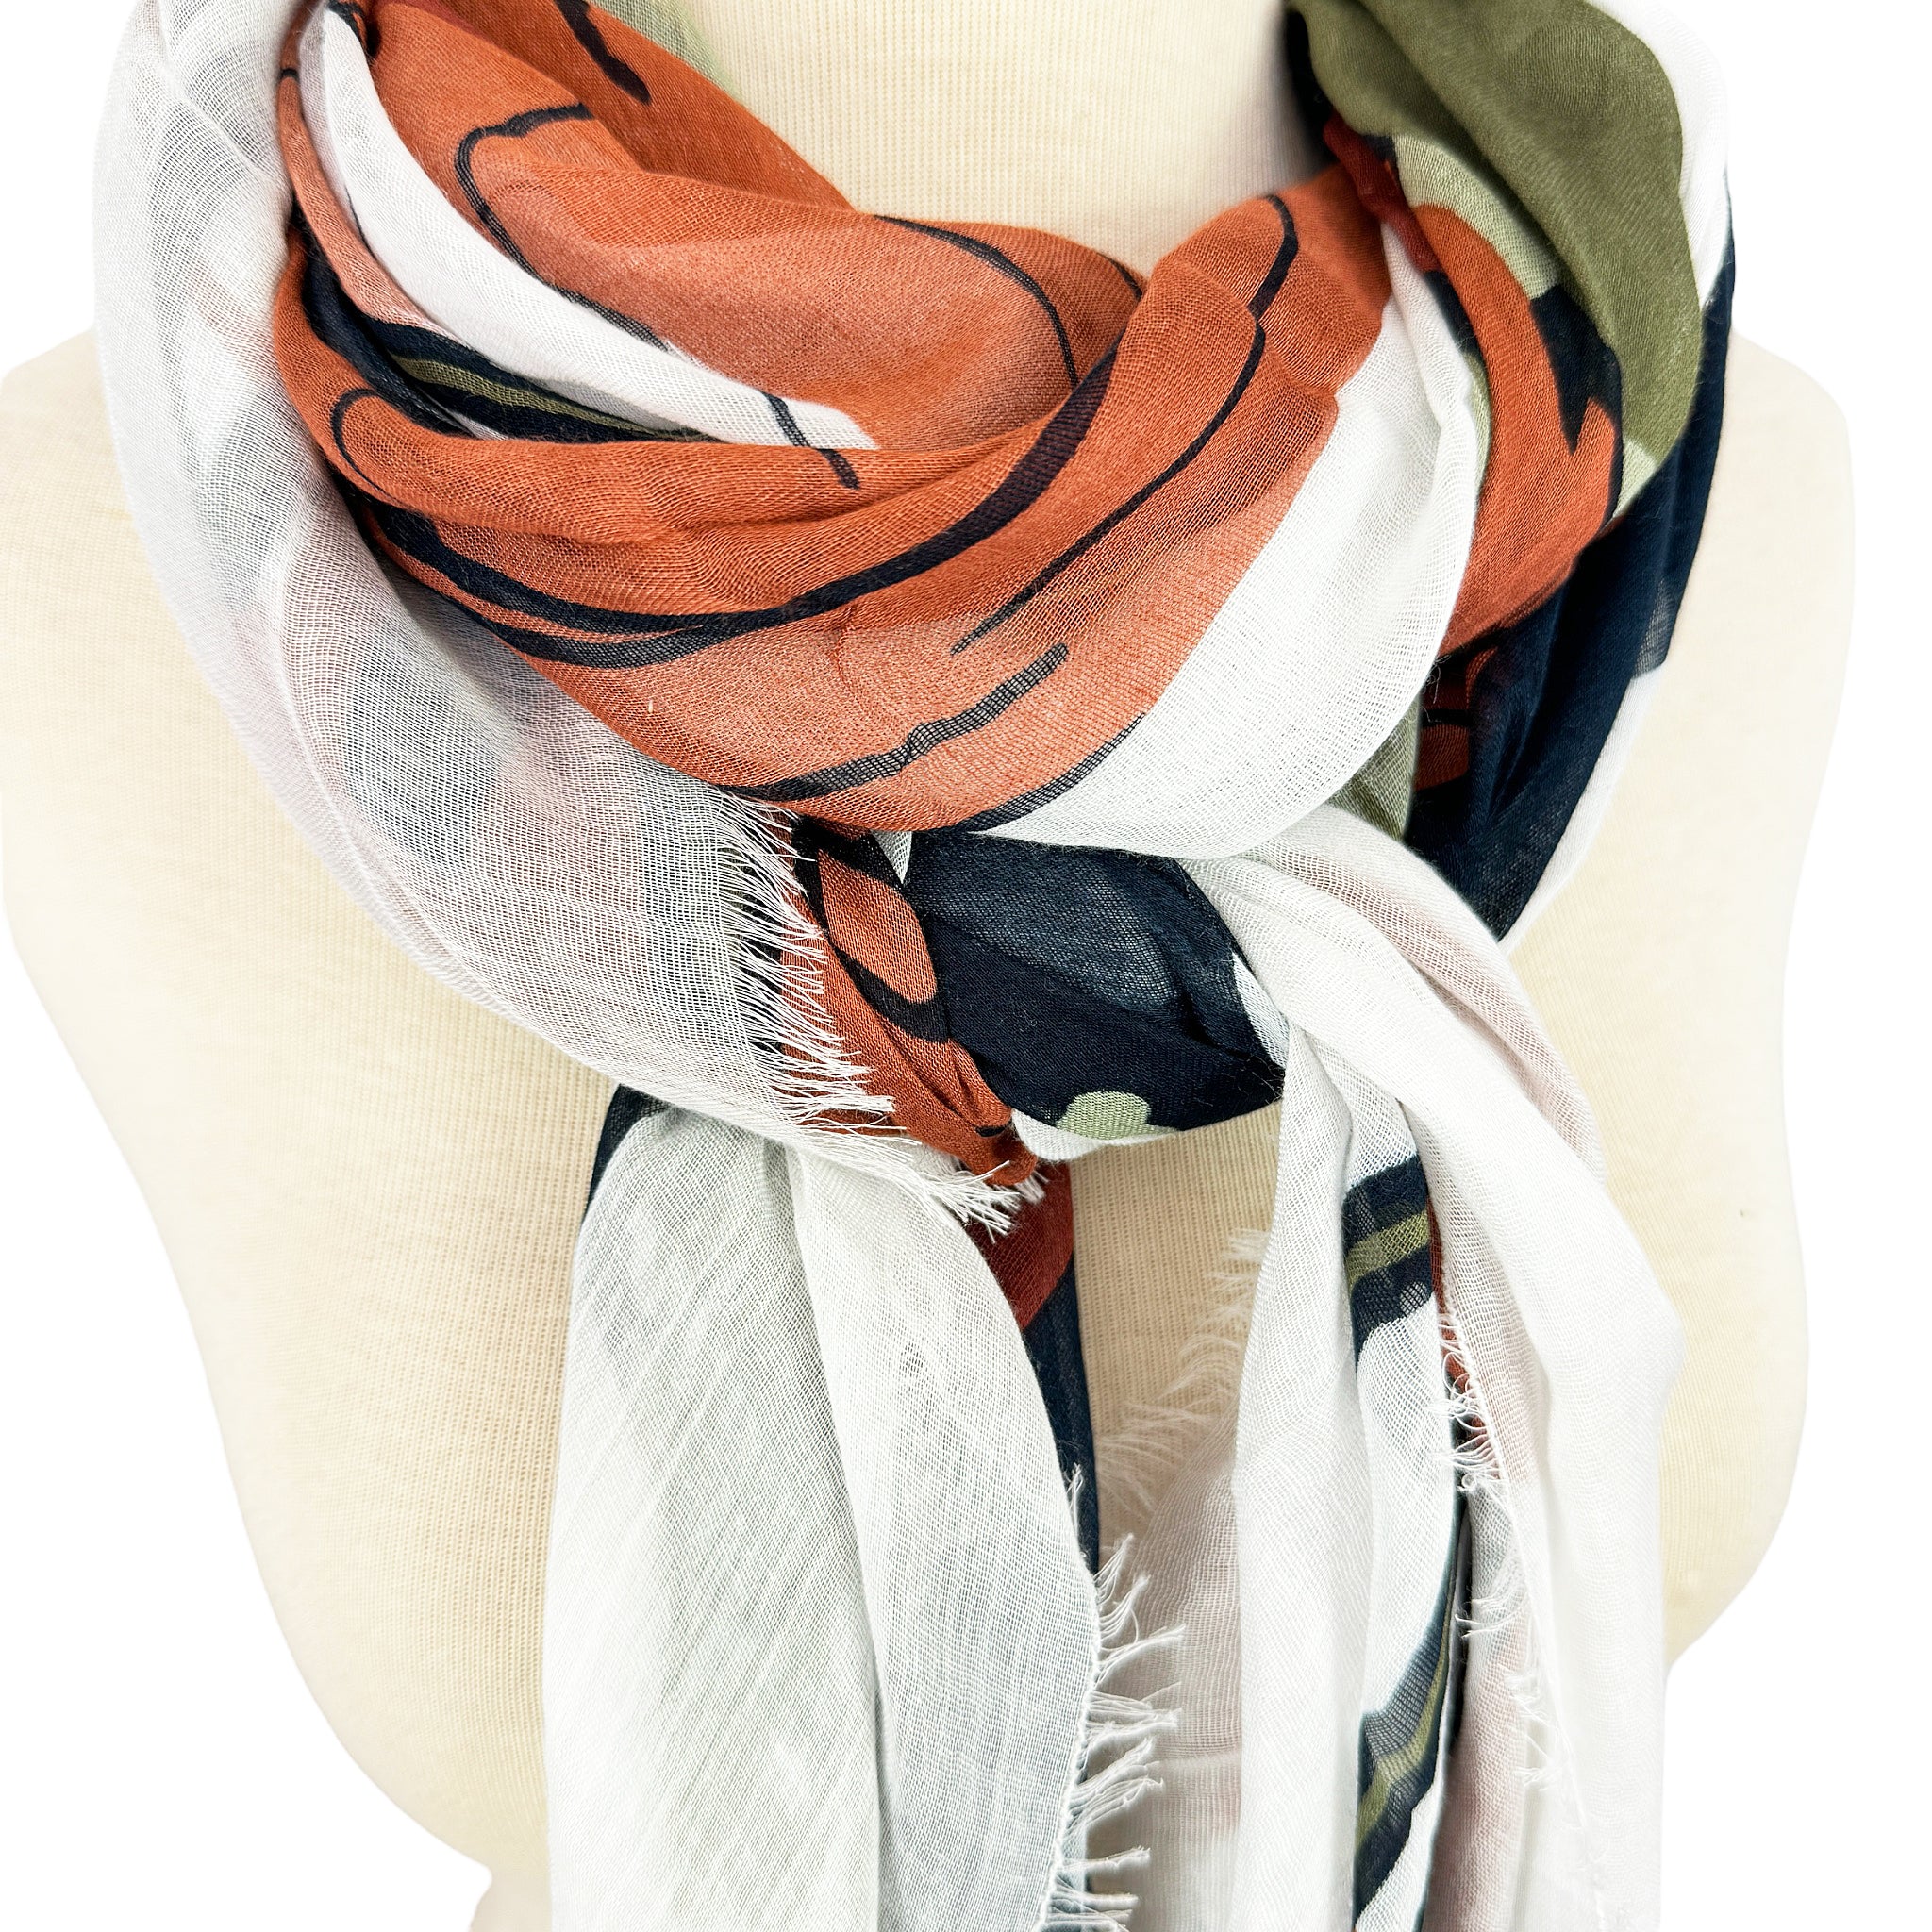 Blue Pacific Micromodal Vintage Vineyard Sonoma Scarf in Rust Olive and Black